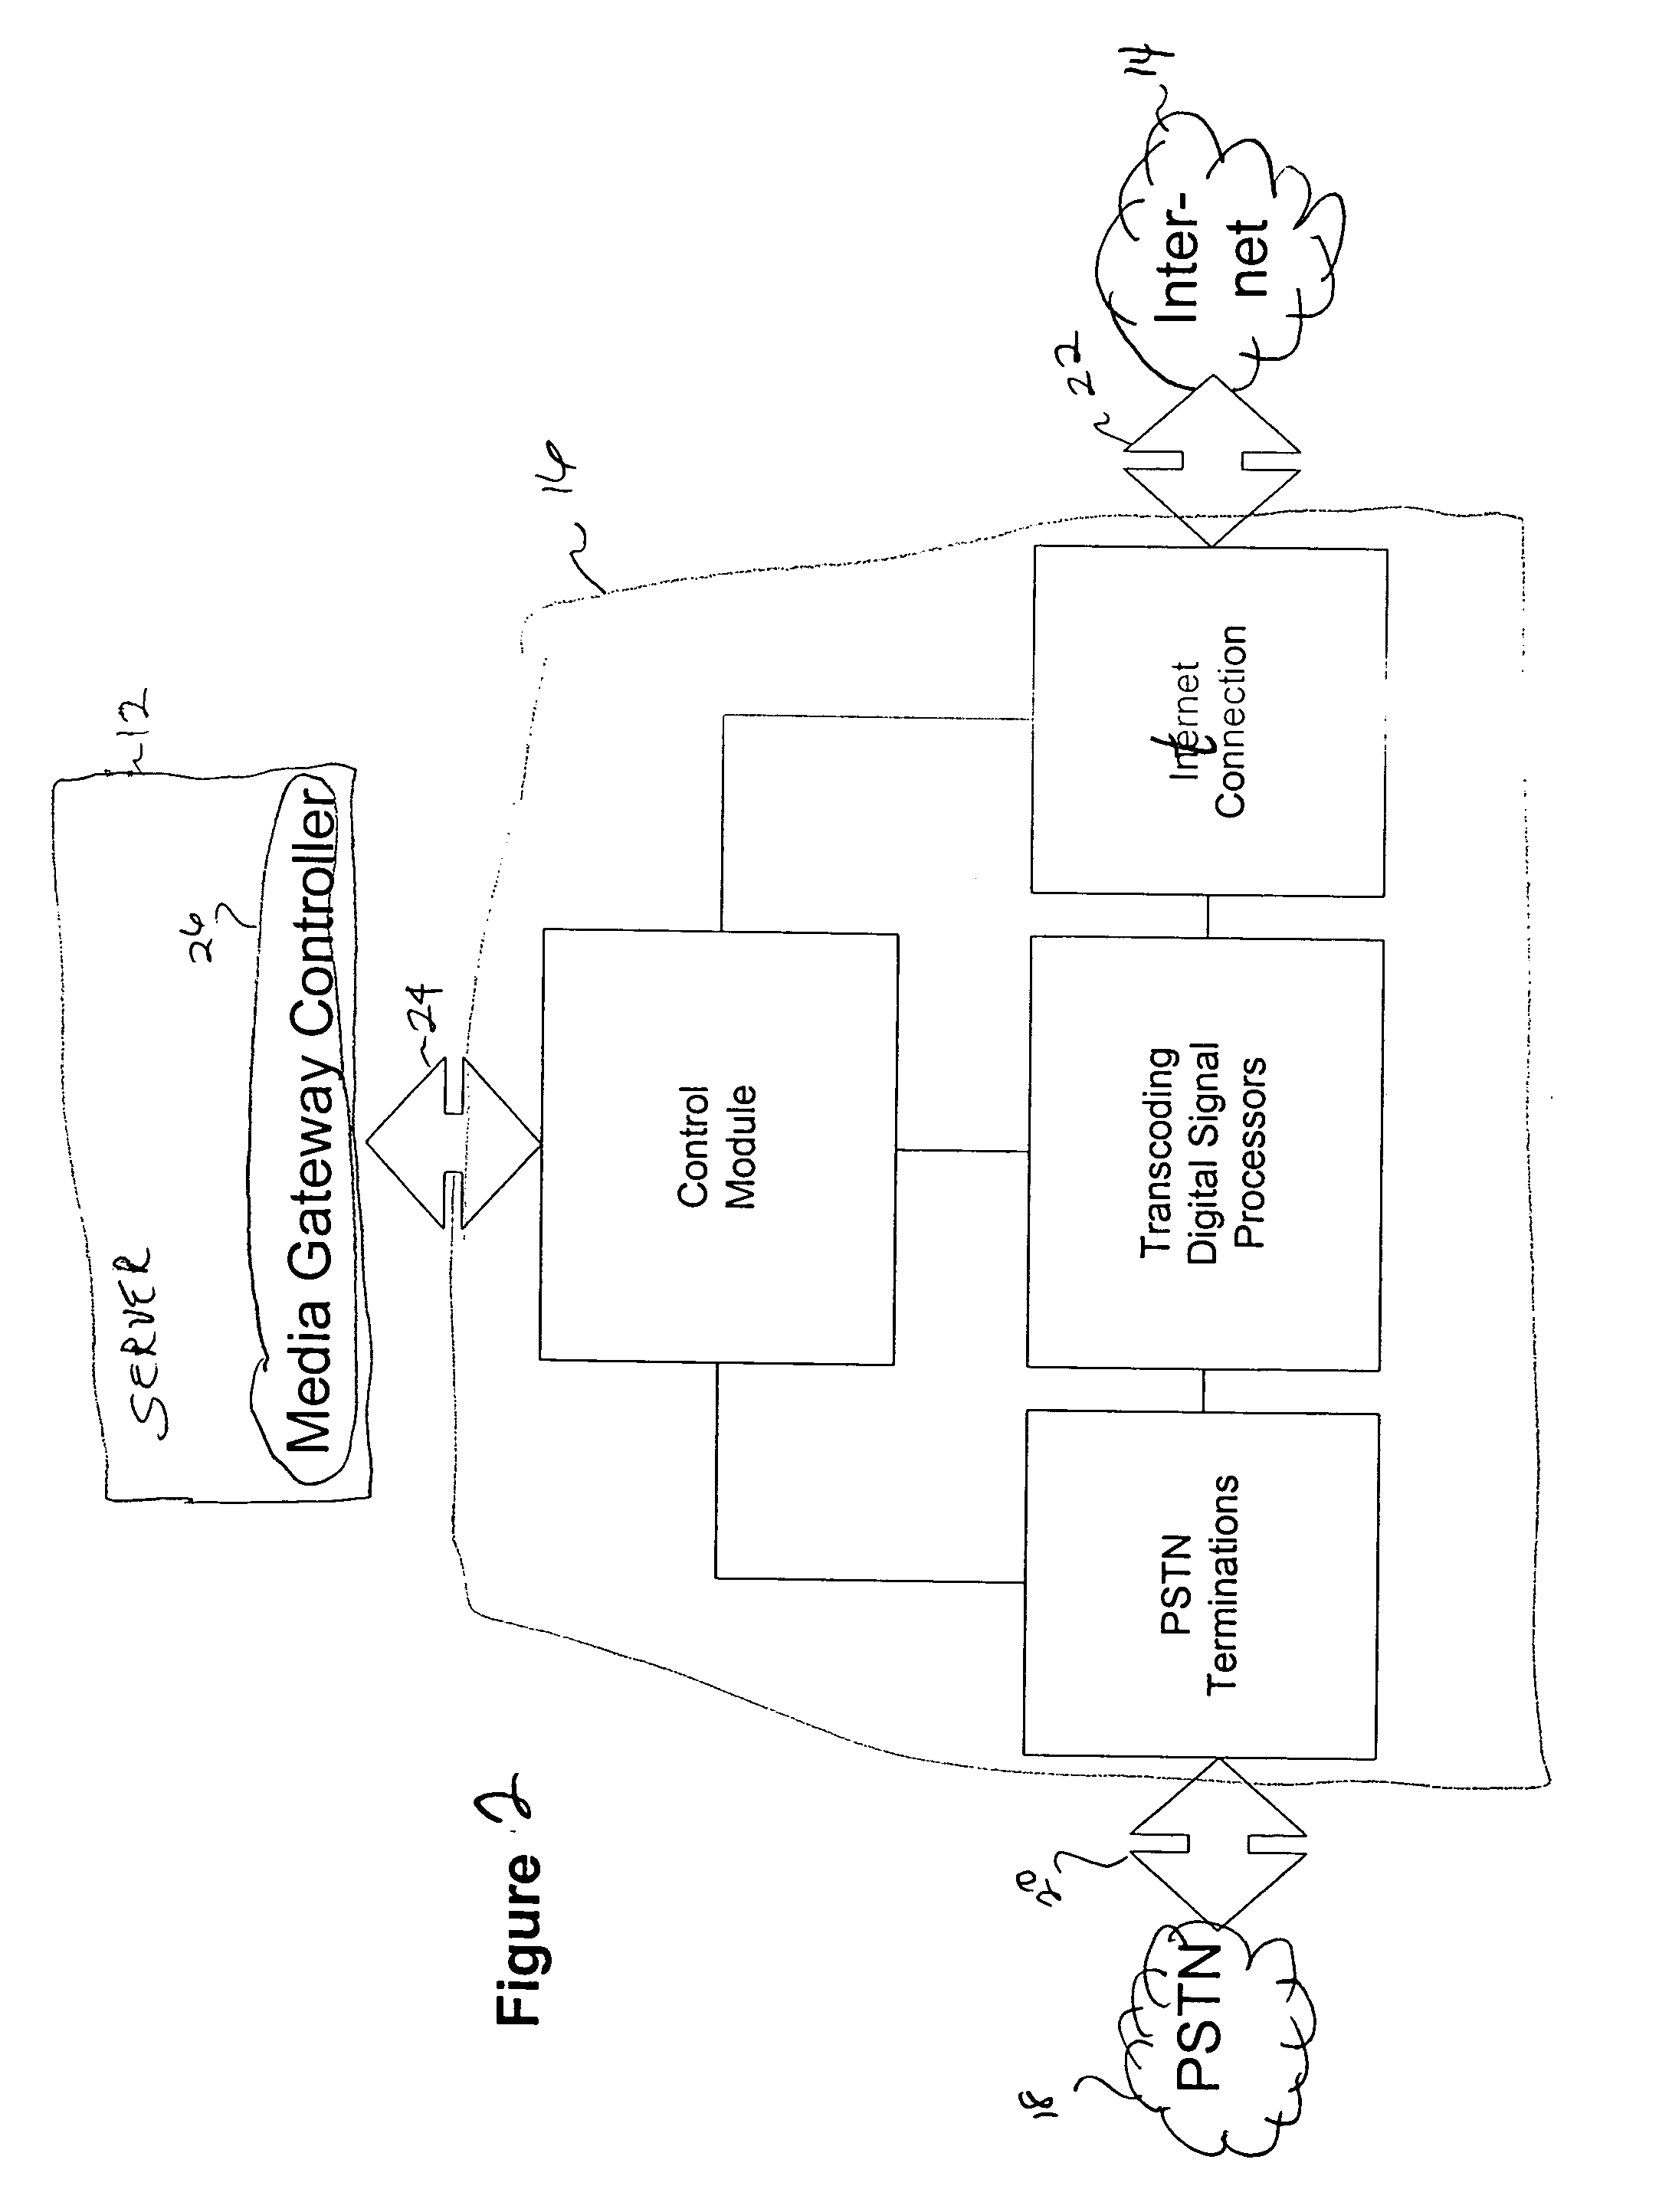 Methods and systems for providing communications services